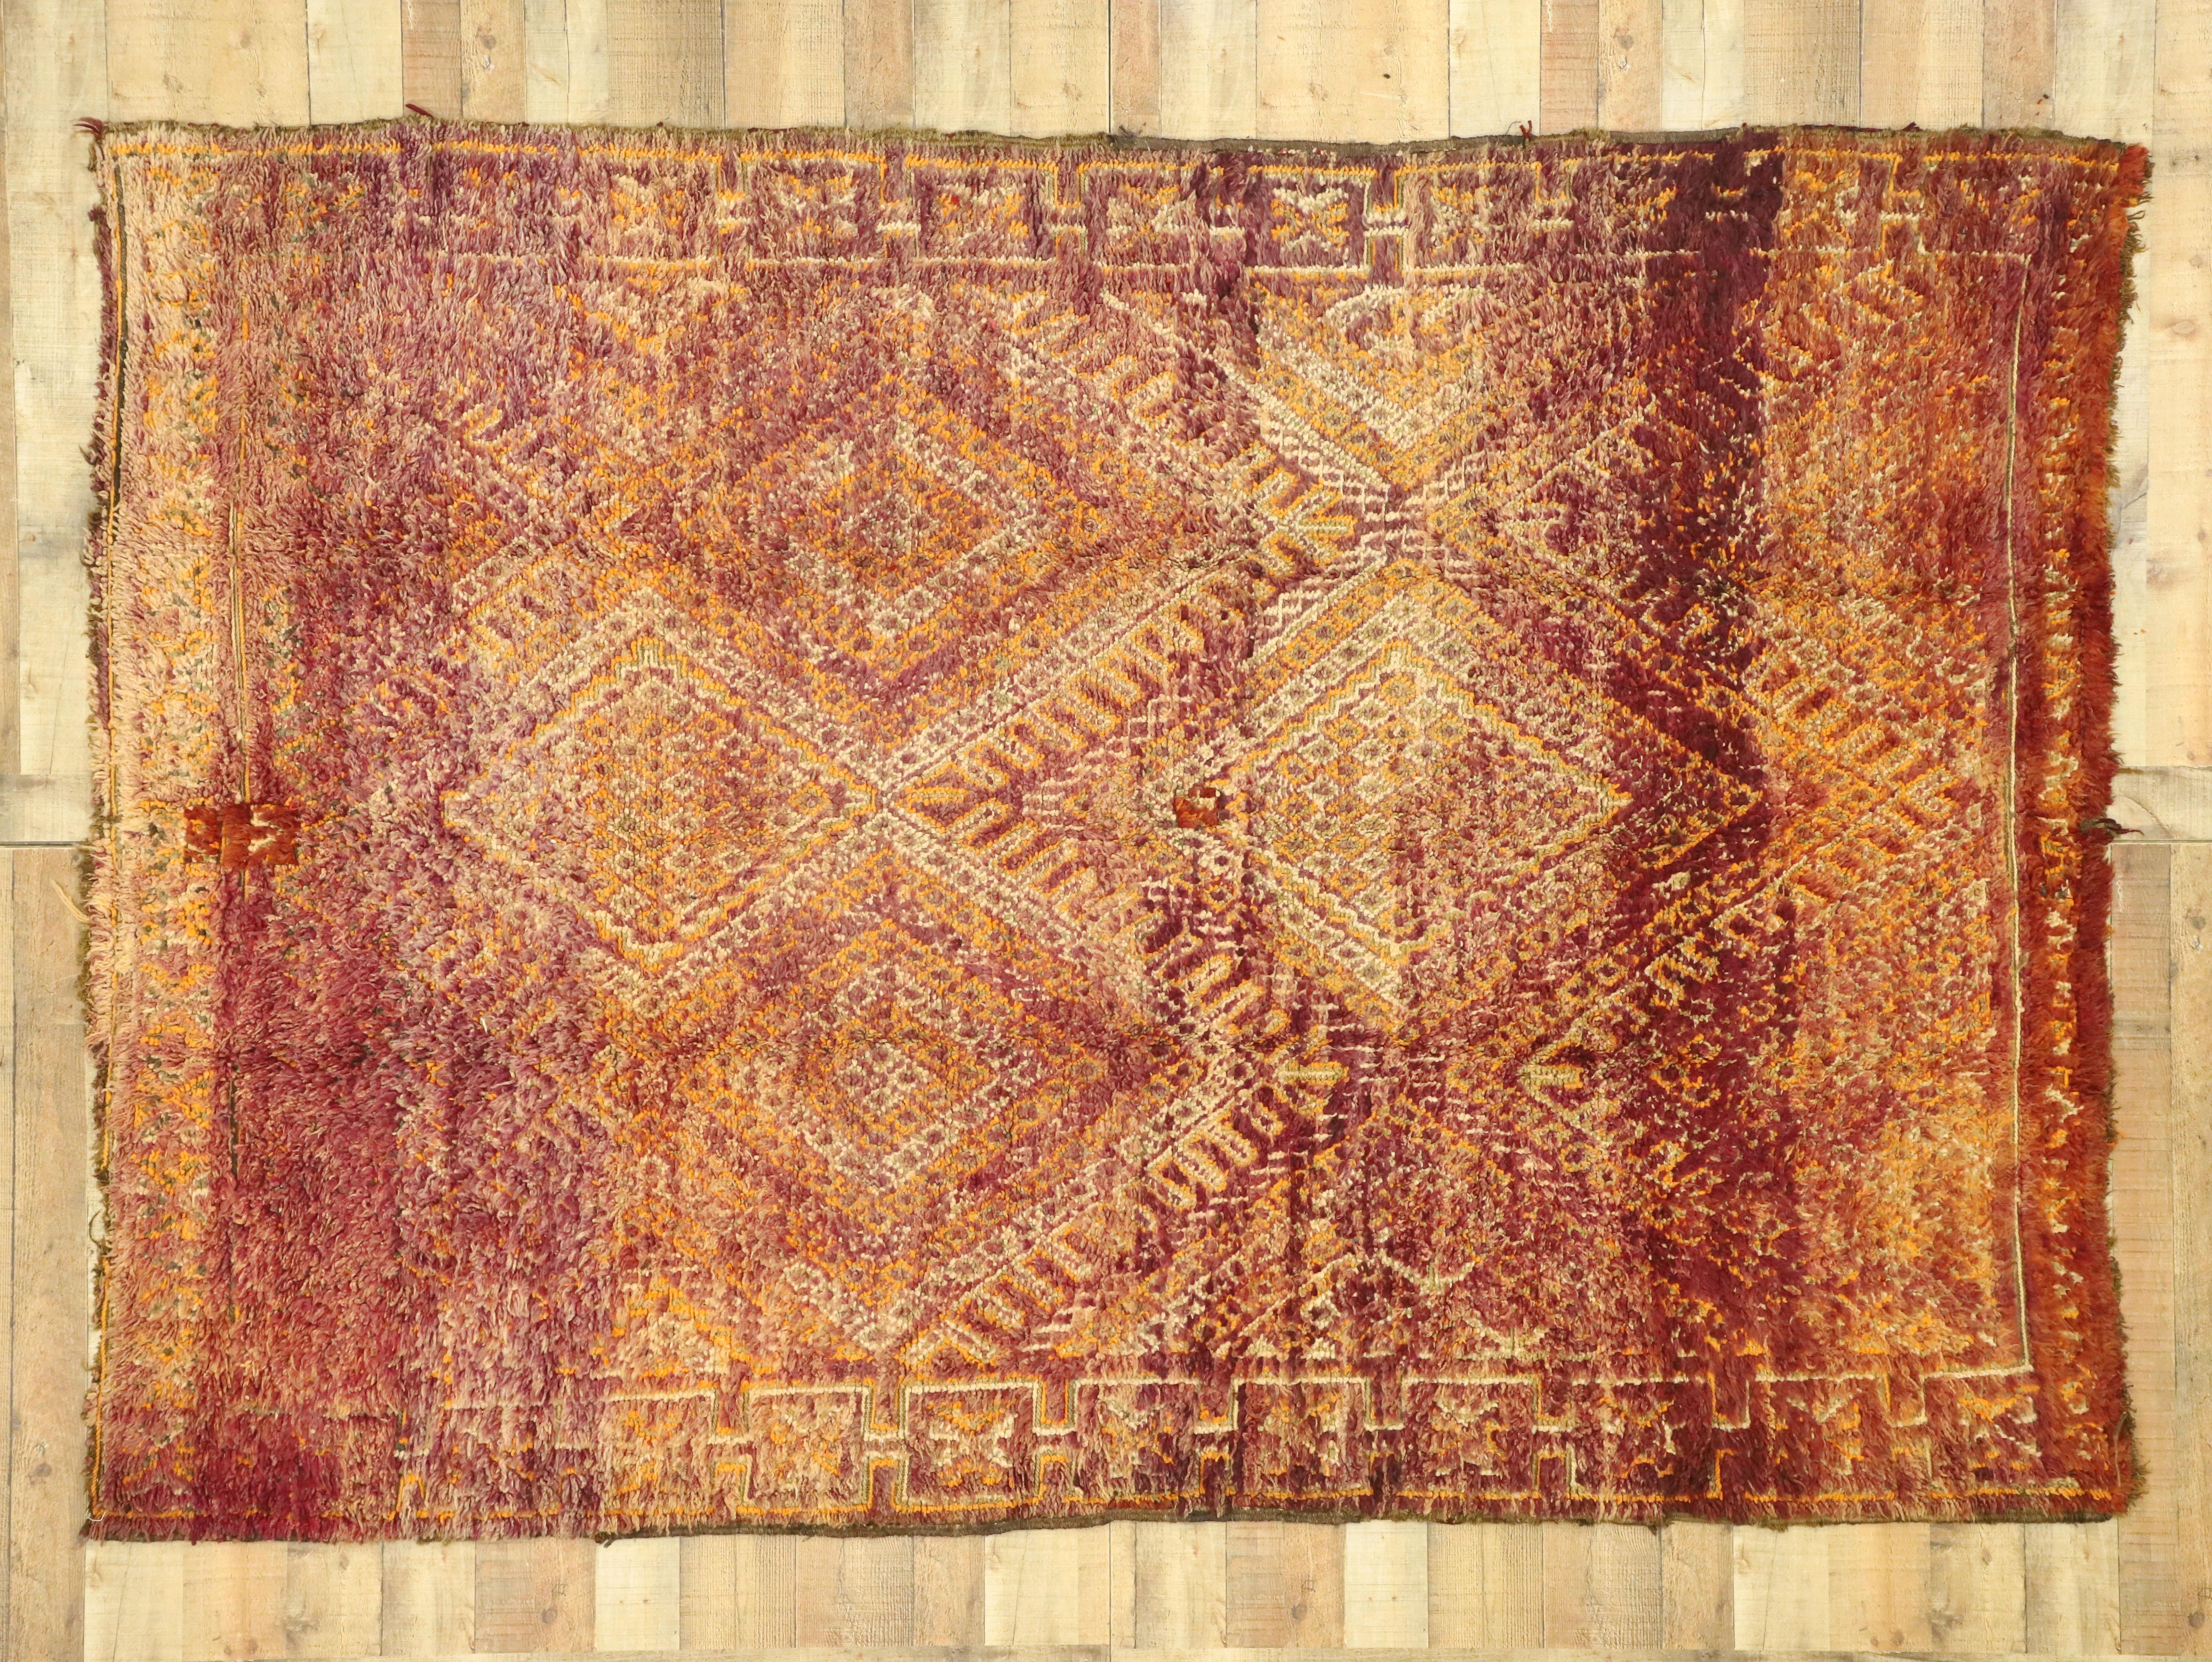 Vintage Beni M'Guild Moroccan Rug with a Diamond Pattern in Warm, Spicy Hues 1